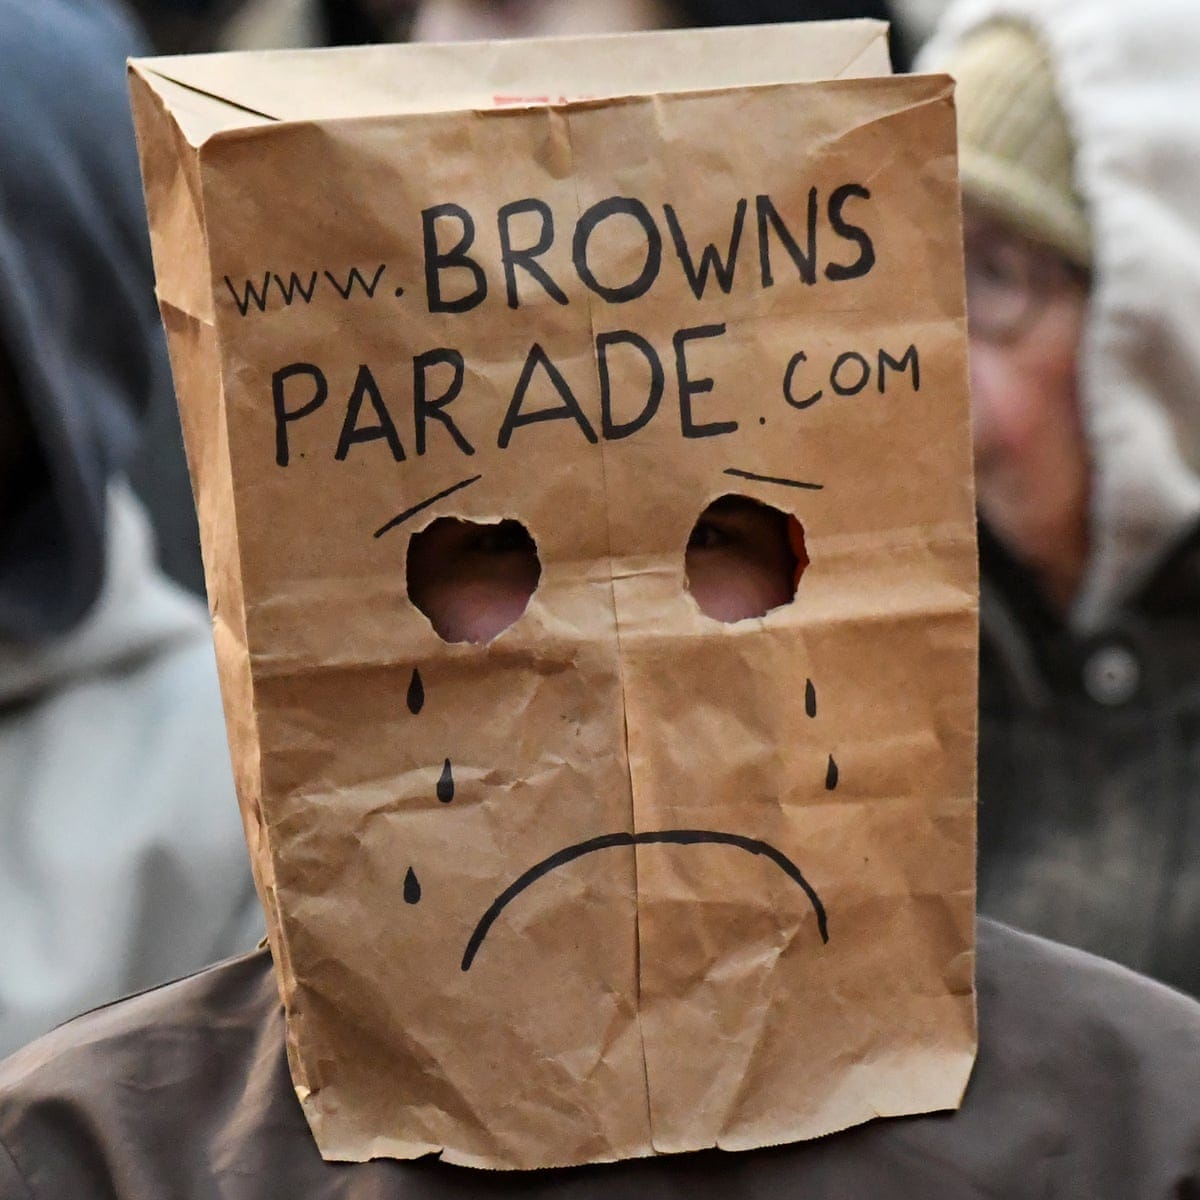 Cleveland Browns fans finally get a parade ... only one they never hoped  for | Cleveland Browns | The Guardian